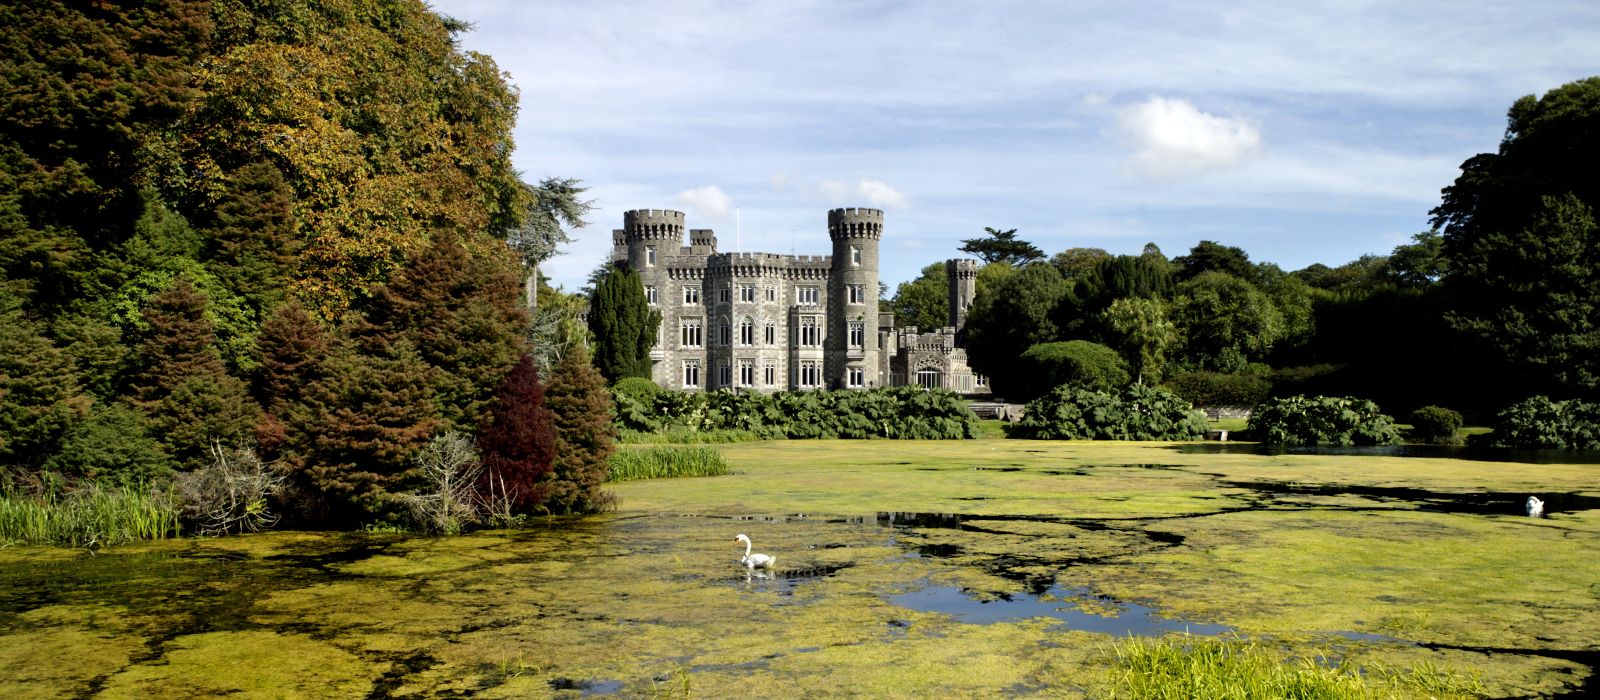 Castle & Gardens, accommodation by Discover Ireland Tours Destination Management Company